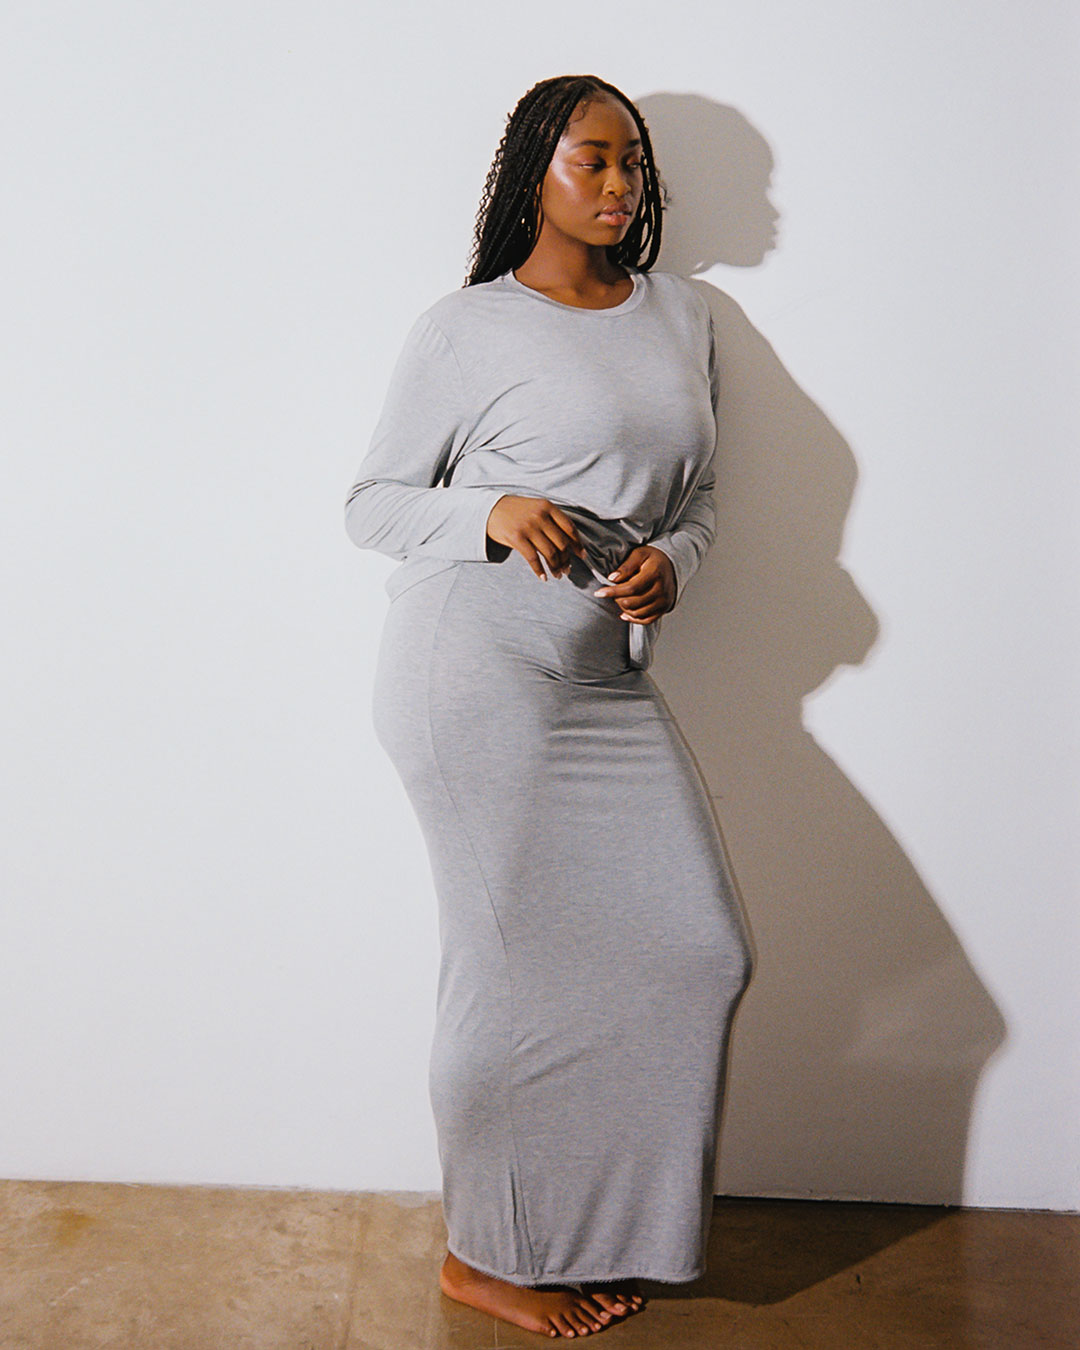 Bamboo Fitted Maxi Skirt - Grey